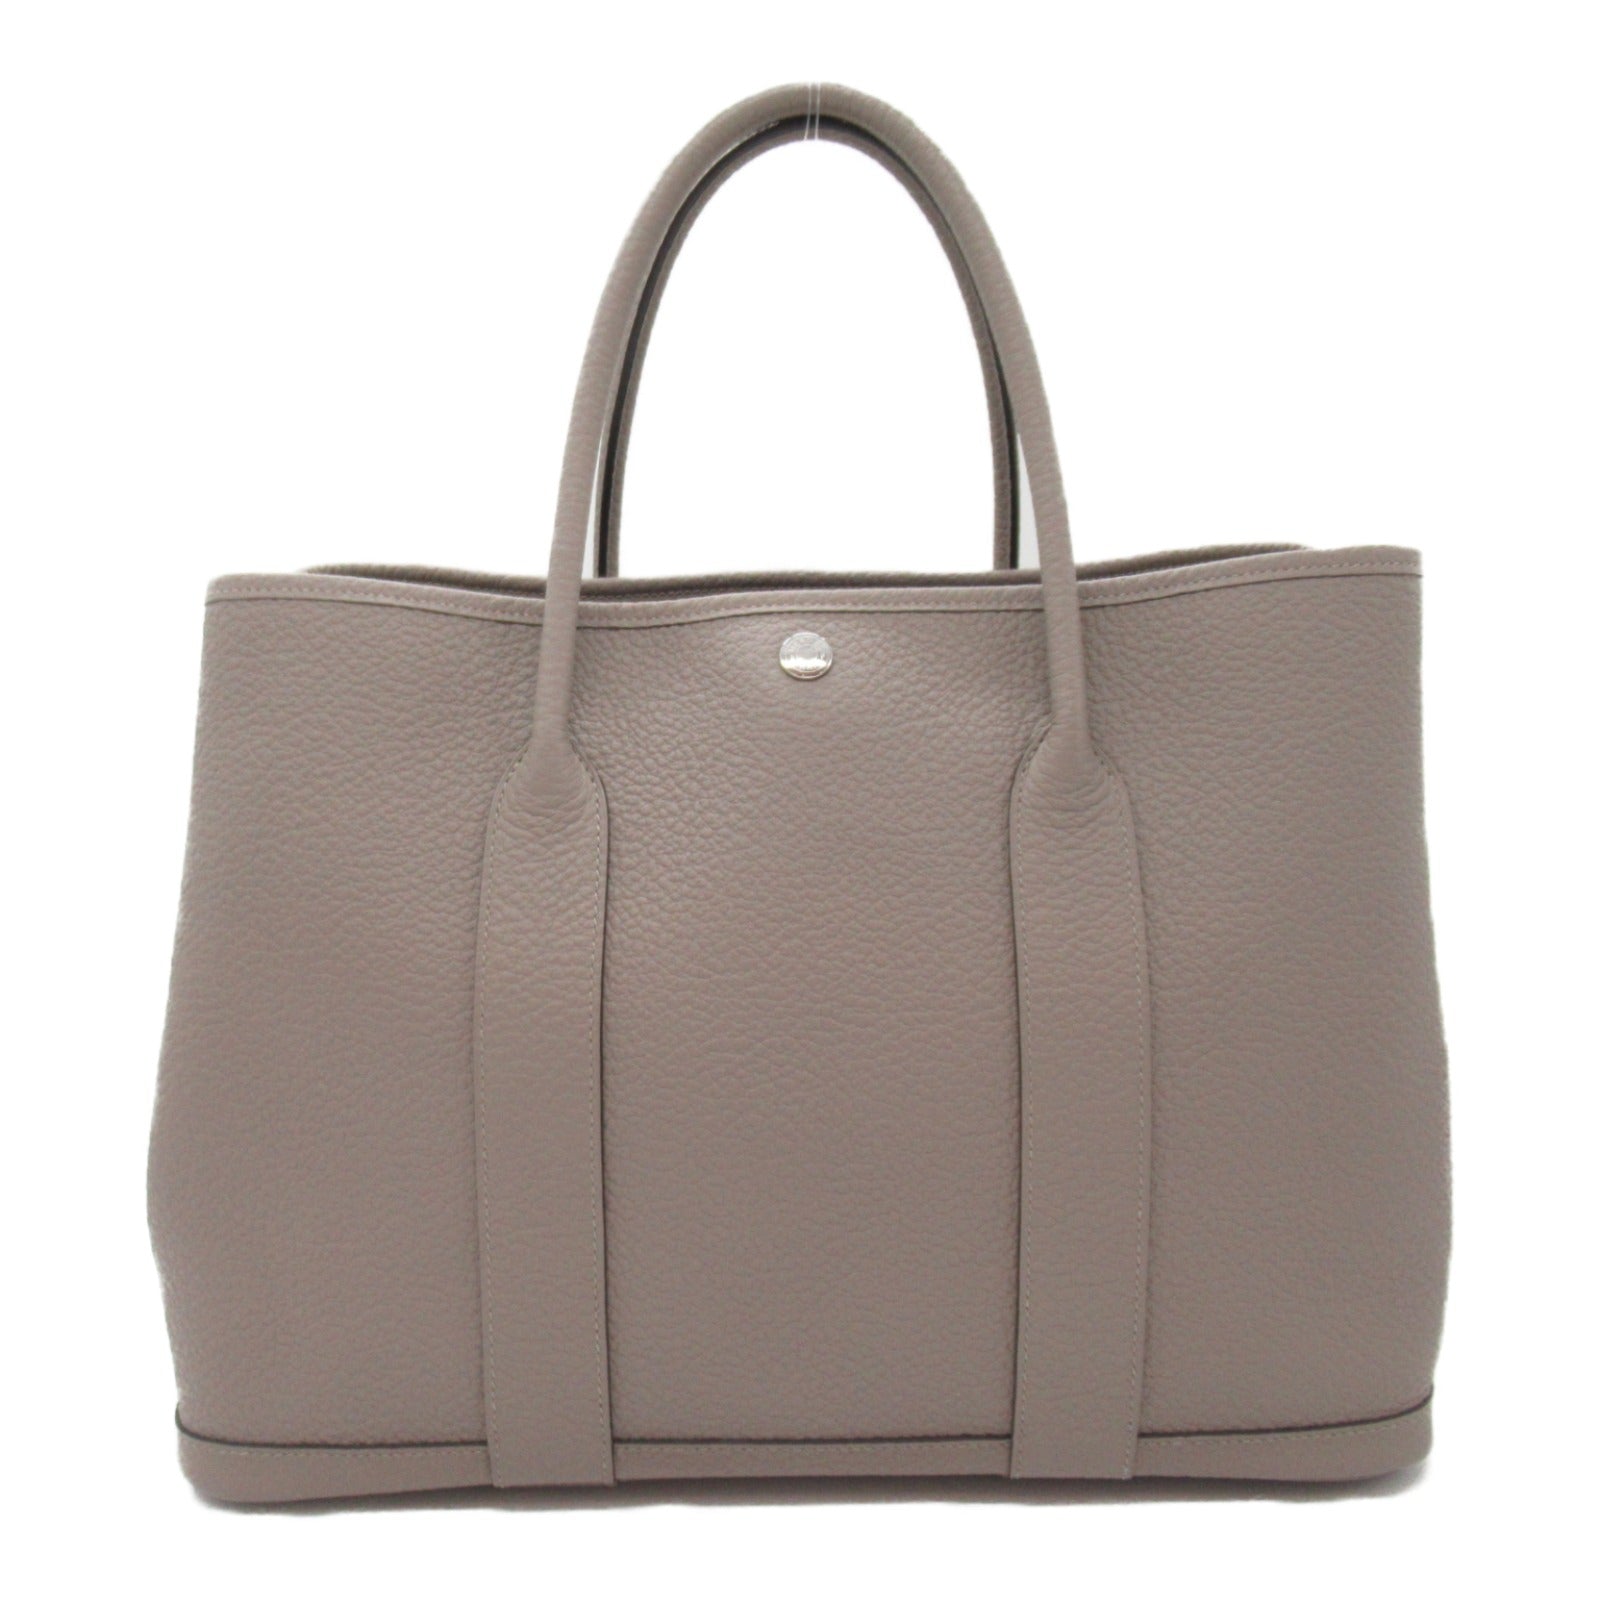 Hermes Garden Party PM Grizzly Tote Bag